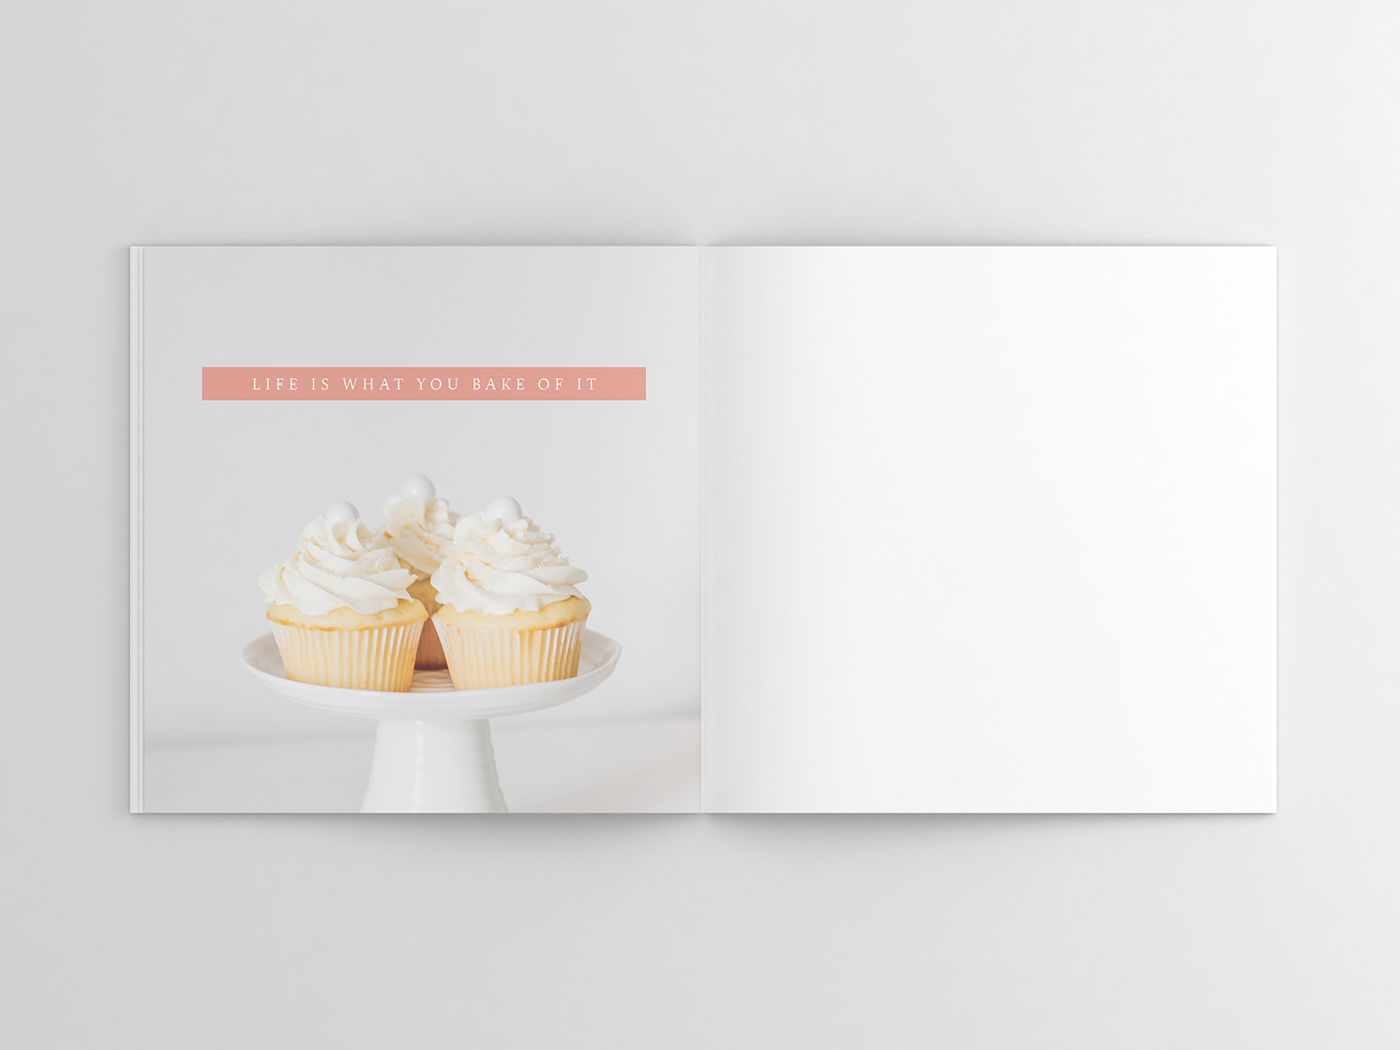 thesis branding  bakery small-business Photography  typography   book book design